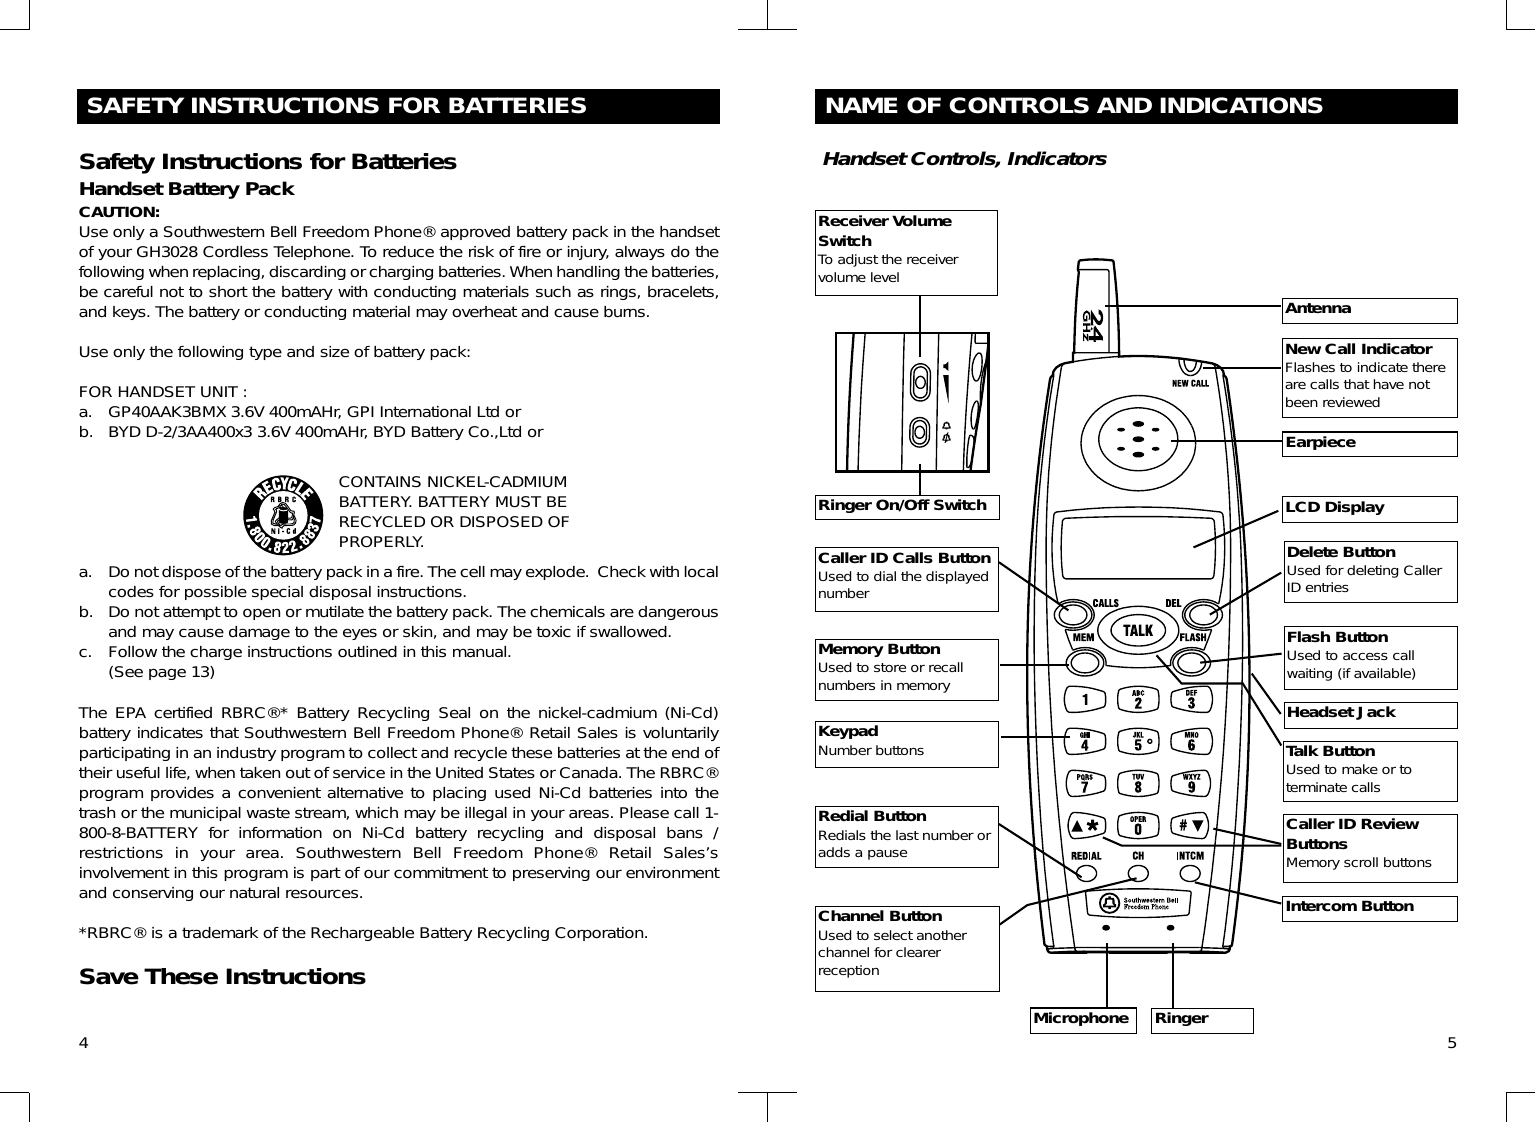 4SAFETY INSTRUCTIONS FOR BATTERIESSafety Instructions for BatteriesHandset Battery PackCAUTION:Use only a Southwestern Bell Freedom Phone® approved battery pack in the handsetof your GH3028 Cordless Telephone. To reduce the risk of fire or injury, always do thefollowing when replacing, discarding or charging batteries. When handling the batteries,be careful not to short the battery with conducting materials such as rings, bracelets,and keys. The battery or conducting material may overheat and cause burns.Use only the following type and size of battery pack:FOR HANDSET UNIT :a. GP40AAK3BMX 3.6V 400mAHr, GPI International Ltd orb. BYD D-2/3AA400x3 3.6V 400mAHr, BYD Battery Co.,Ltd ora. Do not dispose of the battery pack in a fire. The cell may explode.  Check with localcodes for possible special disposal instructions.b. Do not attempt to open or mutilate the battery pack. The chemicals are dangerousand may cause damage to the eyes or skin, and may be toxic if swallowed.c. Follow the charge instructions outlined in this manual.(See page 13)The EPA certified RBRC®* Battery Recycling Seal on the nickel-cadmium (Ni-Cd)battery indicates that Southwestern Bell Freedom Phone® Retail Sales is voluntarilyparticipating in an industry program to collect and recycle these batteries at the end oftheir useful life, when taken out of service in the United States or Canada. The RBRC®program provides a convenient alternative to placing used Ni-Cd batteries into thetrash or the municipal waste stream, which may be illegal in your areas. Please call 1-800-8-BATTERY for information on Ni-Cd battery recycling and disposal bans /restrictions in your area. Southwestern Bell Freedom Phone® Retail Sales’sinvolvement in this program is part of our commitment to preserving our environmentand conserving our natural resources.*RBRC® is a trademark of the Rechargeable Battery Recycling Corporation.Save These InstructionsCONTAINS NICKEL-CADMIUMBATTERY. BATTERY MUST BERECYCLED OR DISPOSED OFPROPERLY.5NAME OF CONTROLS AND INDICATIONSHandset Controls, IndicatorsAntennaEarpieceLCD DisplayNew Call IndicatorFlashes to indicate thereare calls that have notbeen reviewedMemory ButtonUsed to store or recallnumbers in memoryDelete ButtonUsed for deleting CallerID entriesRedial ButtonRedials the last number oradds a pauseFlash ButtonUsed to access callwaiting (if available)MicrophoneReceiver VolumeSwitchTo adjust the receivervolume levelRinger On/Off SwitchCaller ID ReviewButtonsMemory scroll buttonsCaller ID Calls ButtonUsed to dial the displayednumberTalk ButtonUsed to make or toterminate callsKeypadNumber buttonsChannel ButtonUsed to select anotherchannel for clearerreceptionIntercom ButtonRingerHeadset Jack